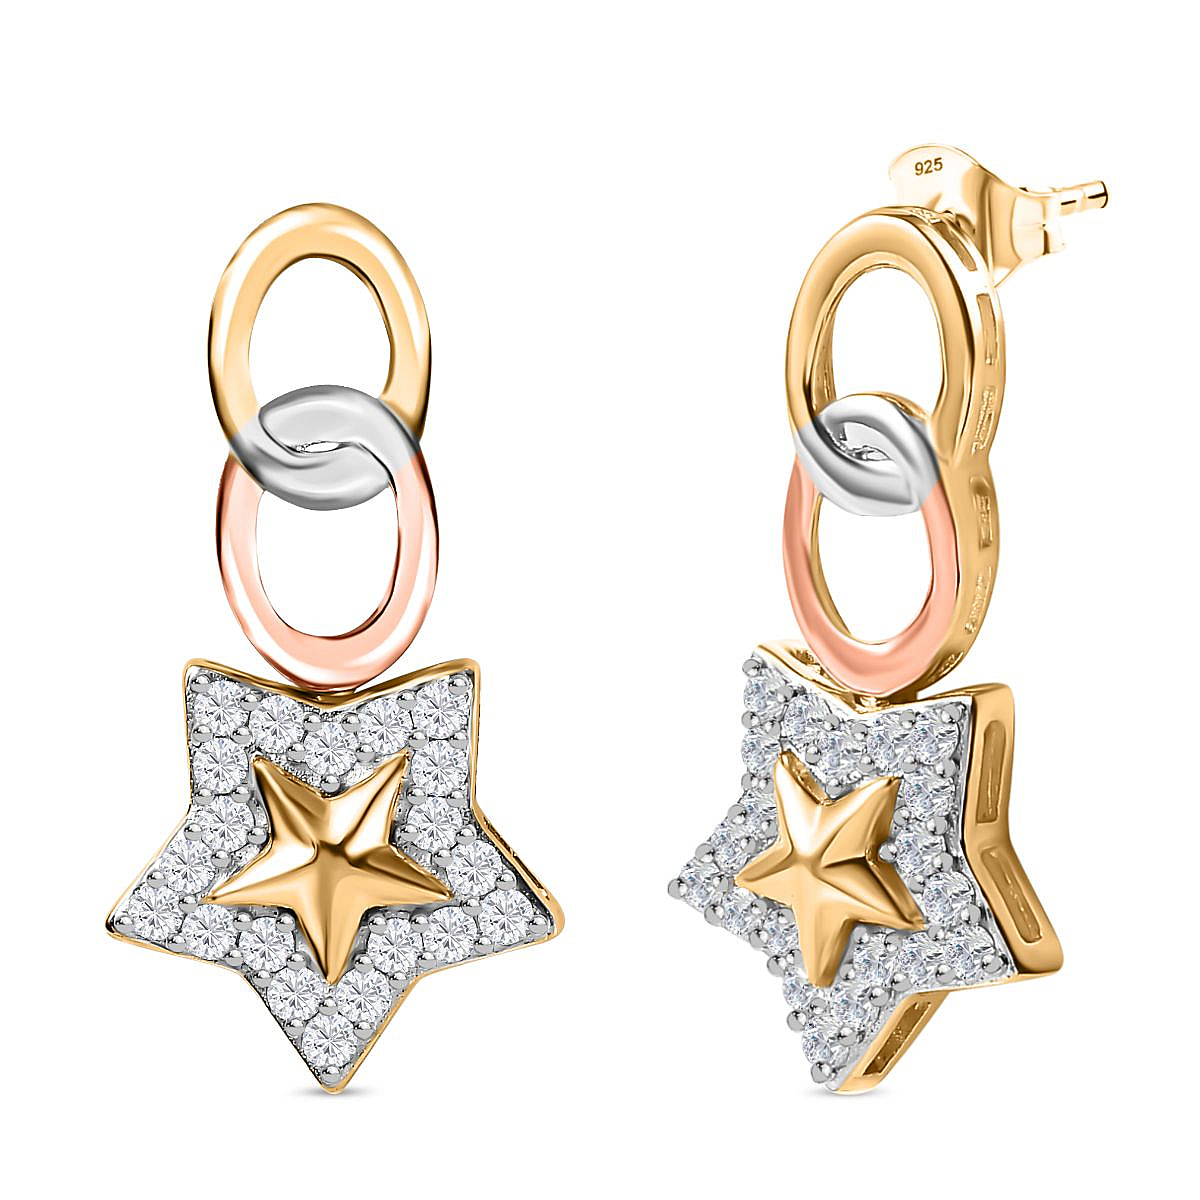 GP Celestial Dream Collection - Moissanite Dangle Earrings in 18K Yellow, Rose Gold Vermeil & Platinum Plated Sterling Silver 1.29 Ct, Silver Wt. 7.20 Gms